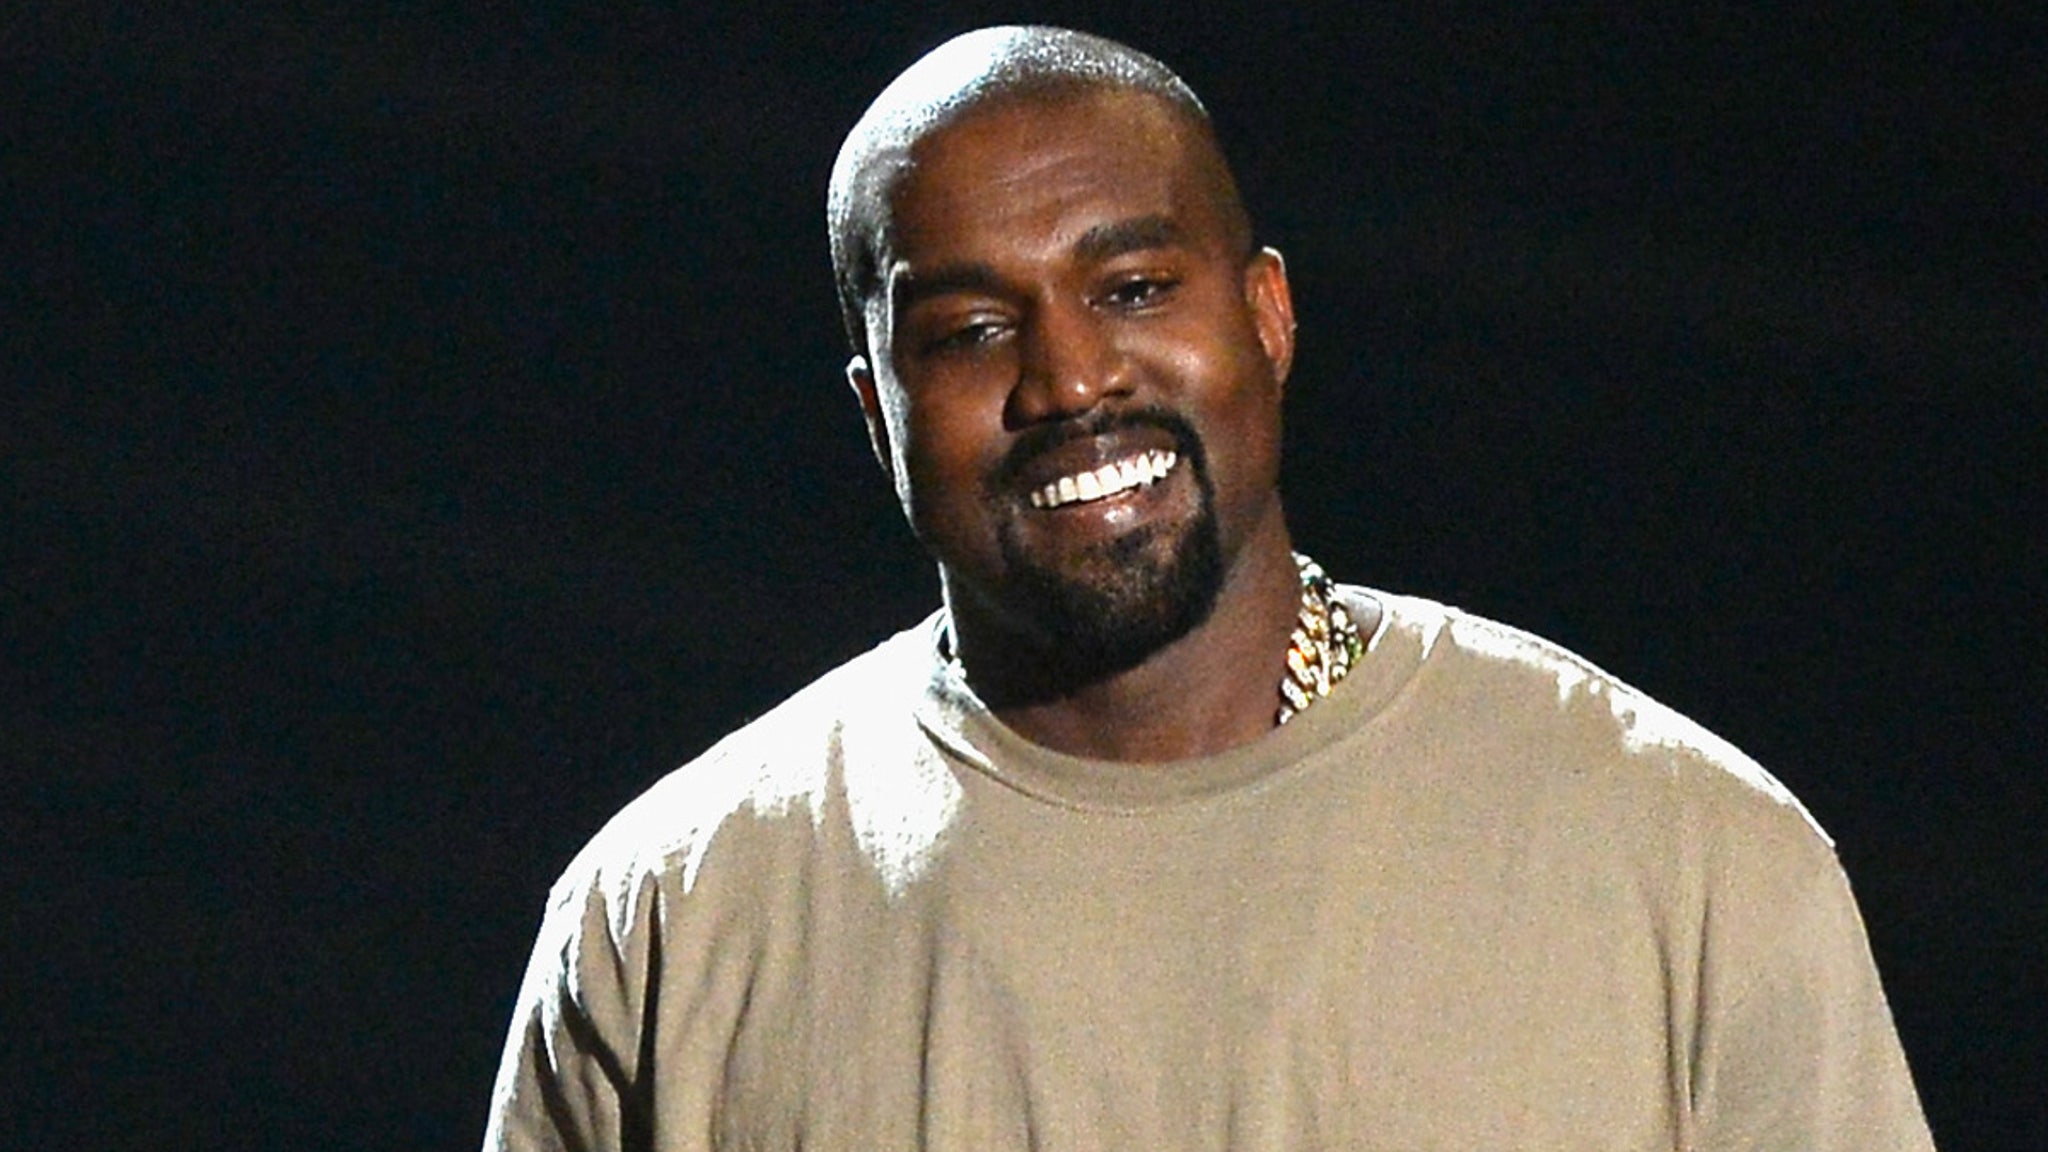 Kanye West Confirms 2020 Presidential Run: 